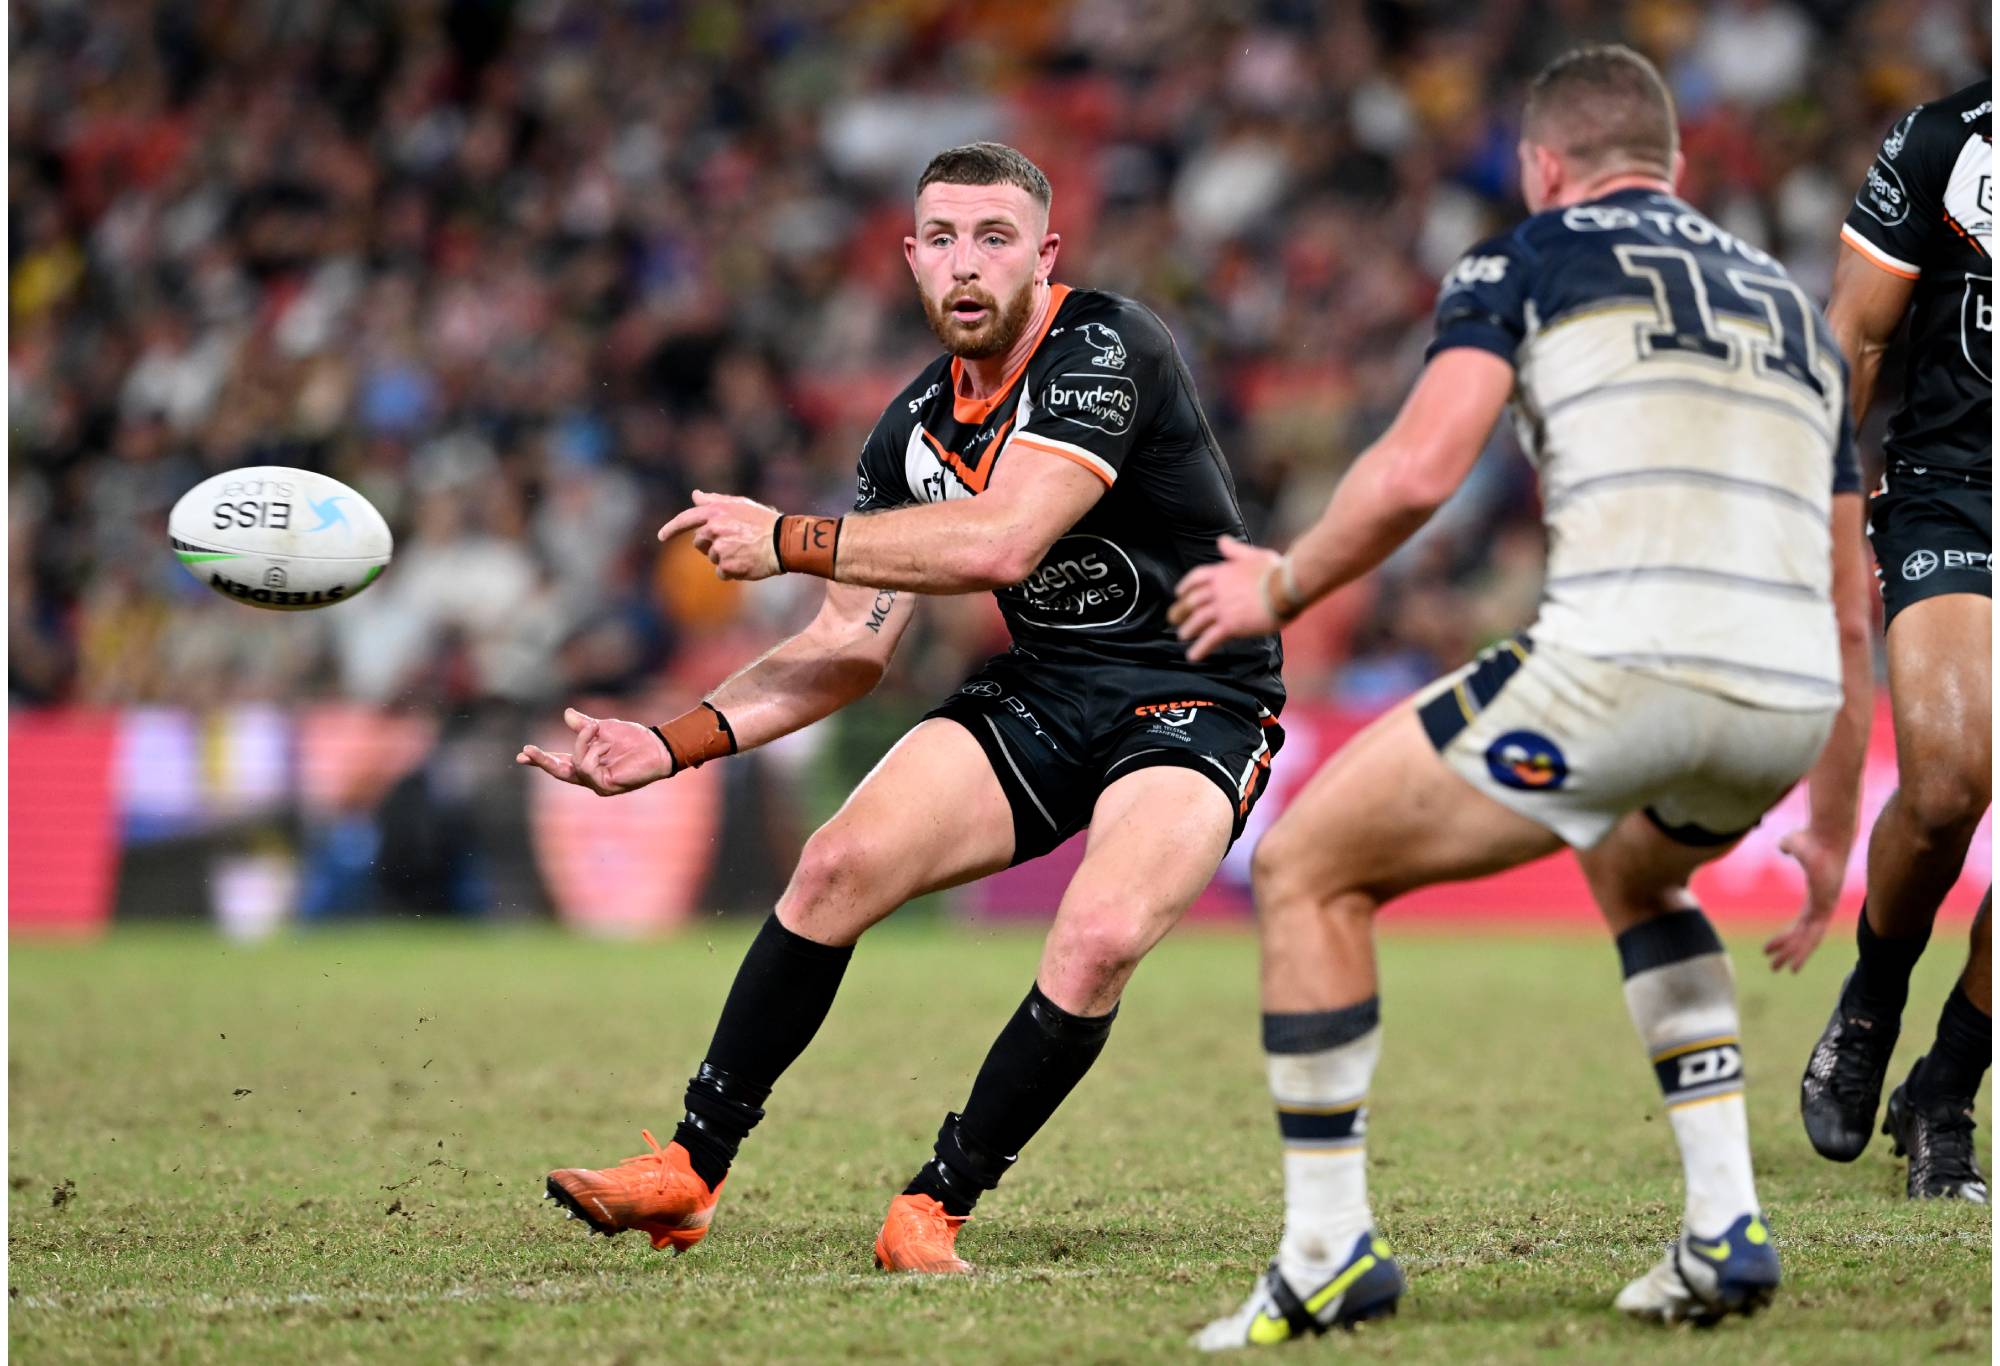 BRISBANE, AUSTRALIA - MAY 15: Jackson Hastings of the Tigers passes the ball during the NRL Round 10 match between the Wests Tigers and the North Queensland Cowboys at Suncorp Stadium on May 15, 2022, in Brisbane, Australia.  (Photo by Bradley Kanaris/Getty Images)